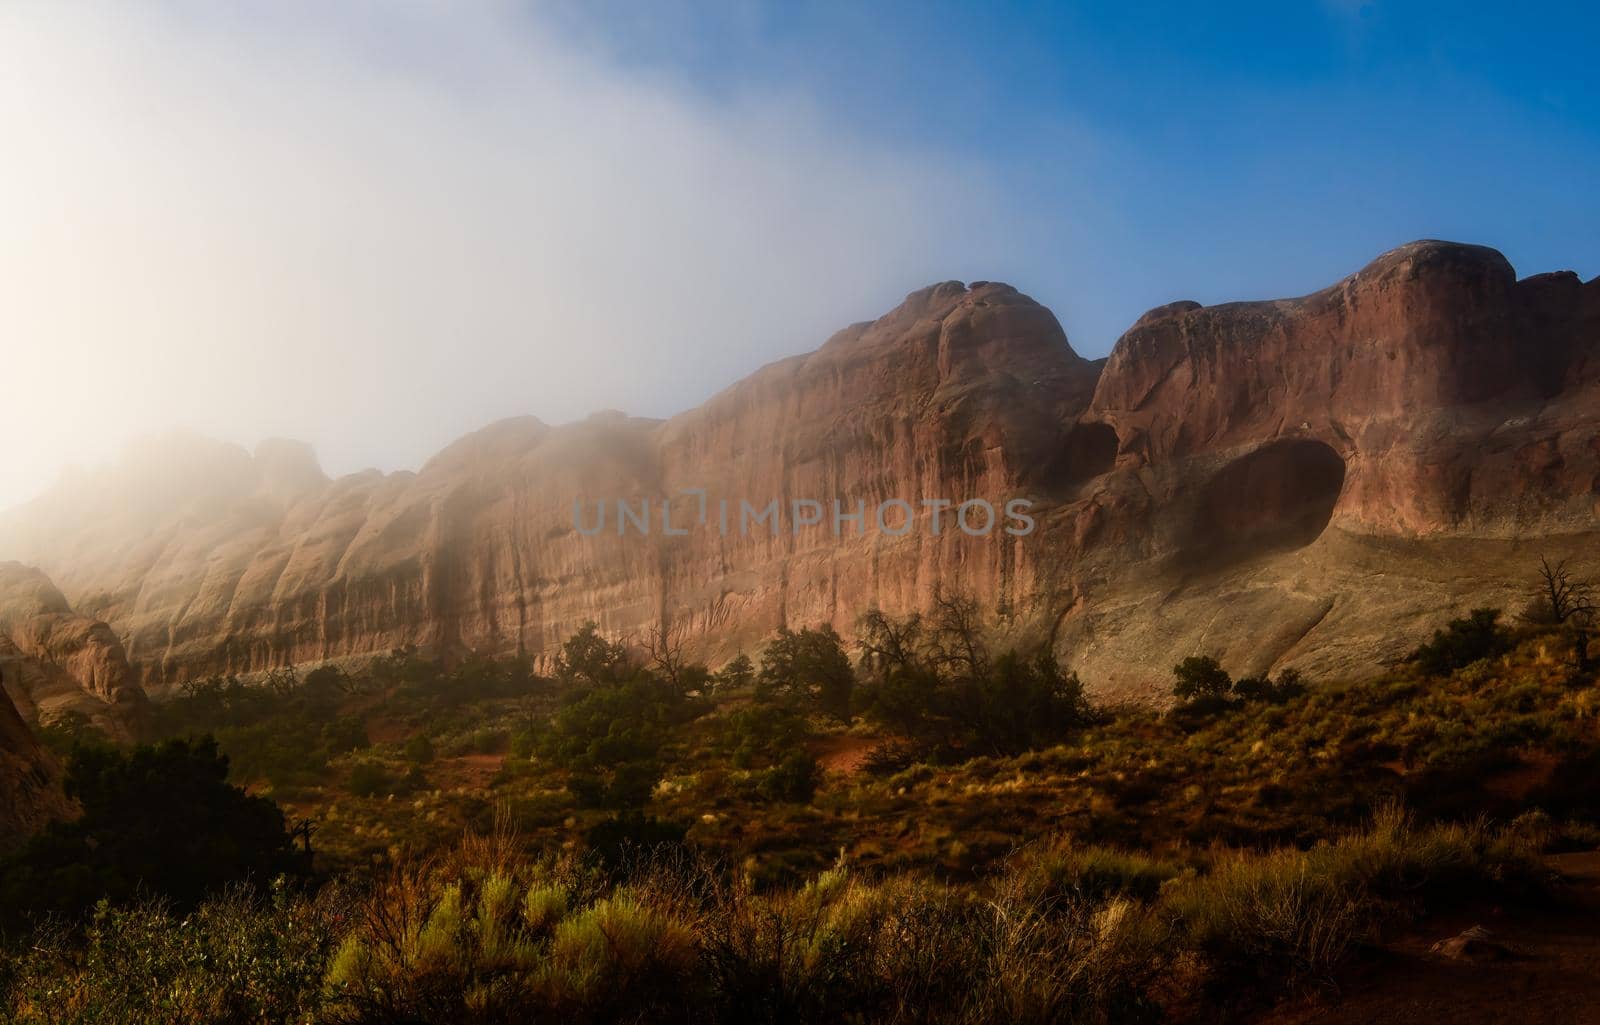 Aches National Park in the Early Morning Mist by lisaldw